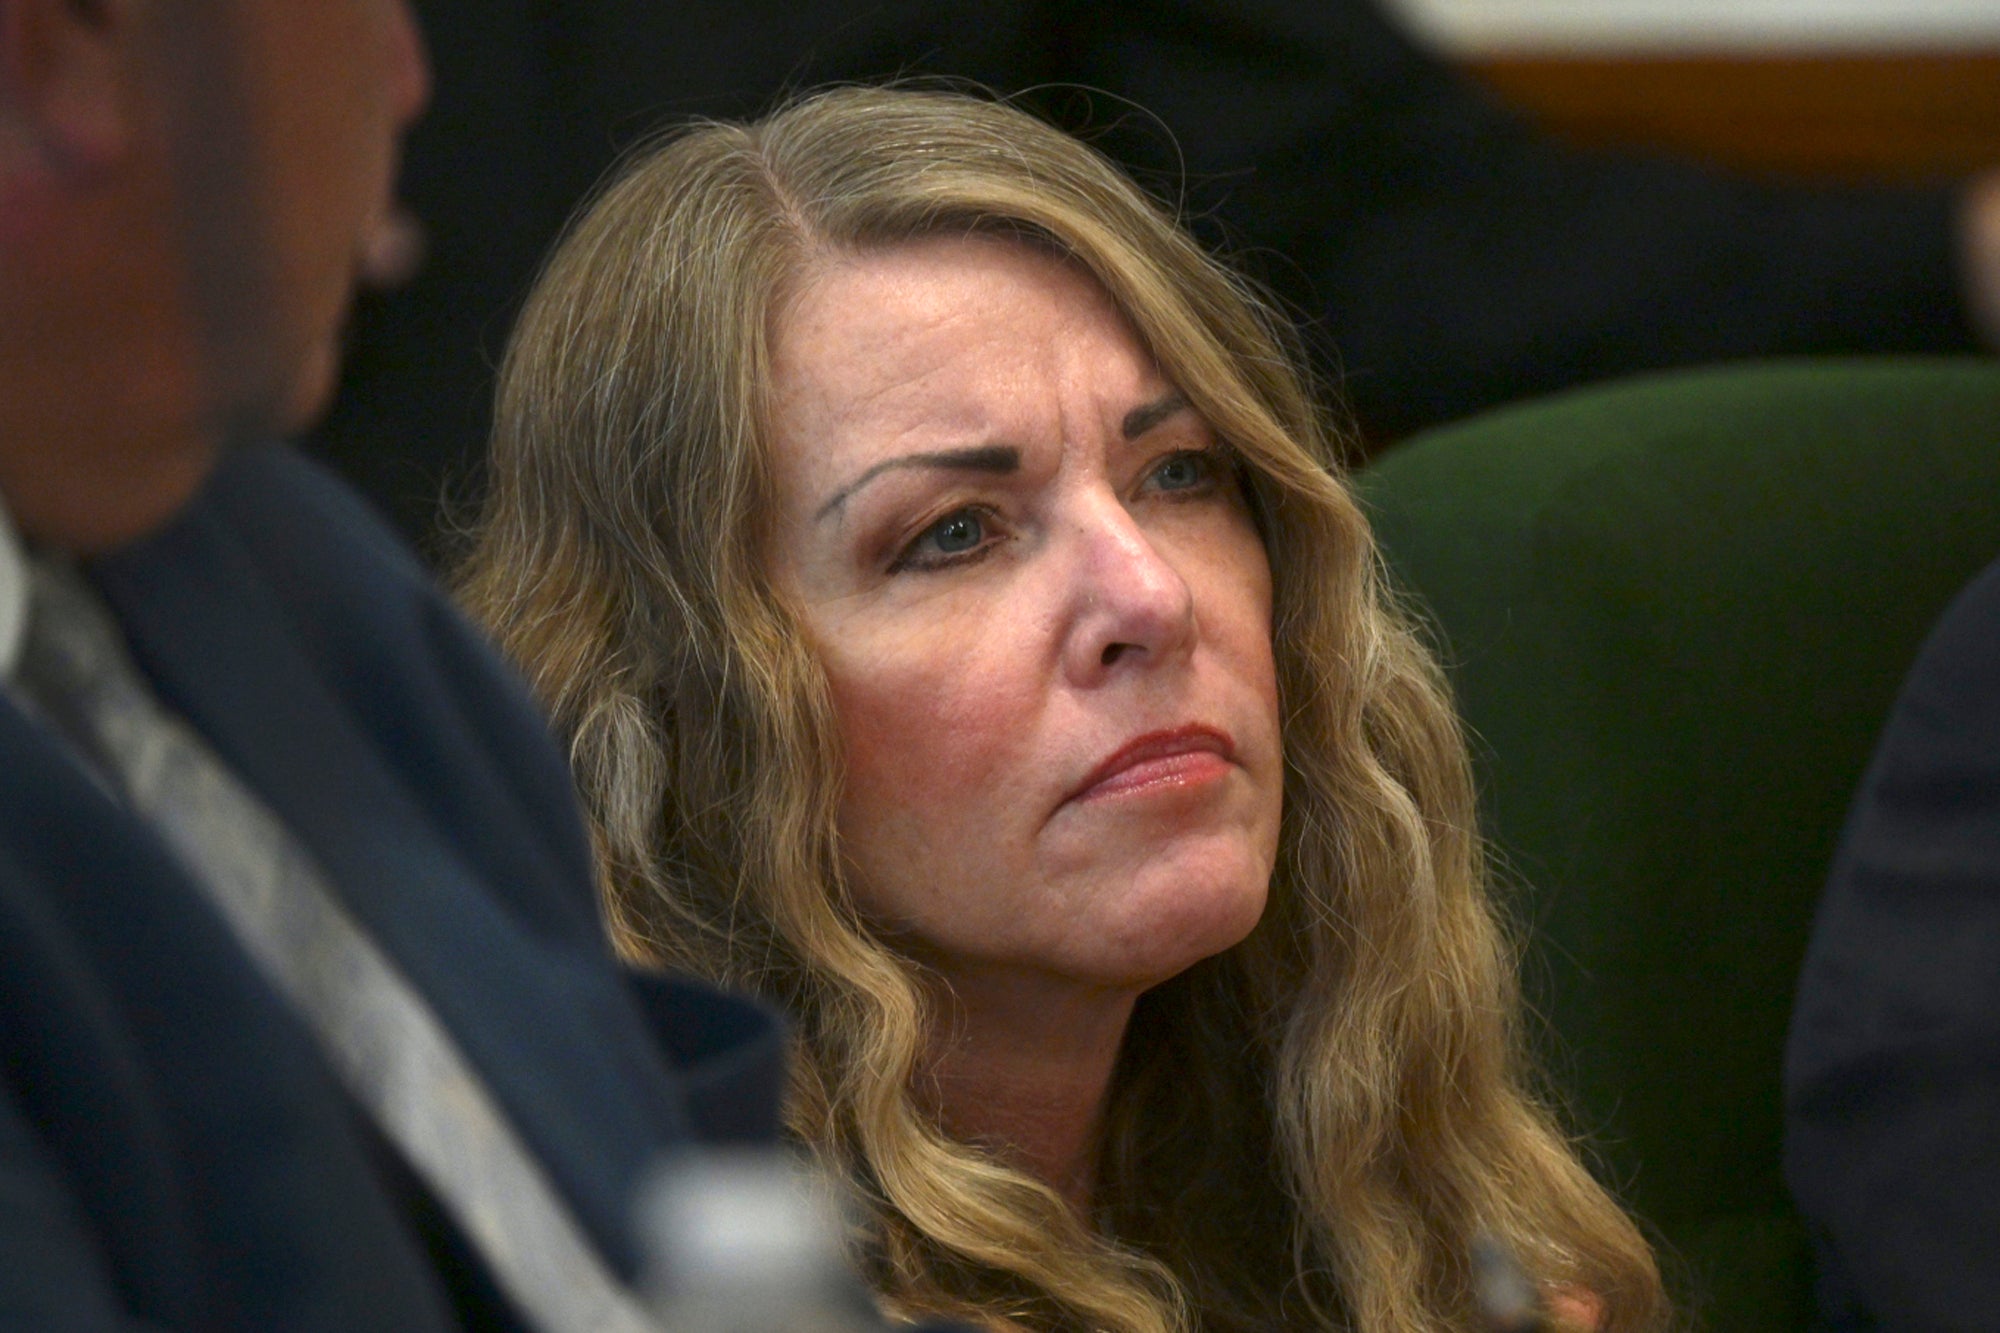 Lori Vallow was found guilty last year and sentenced to life in prison without parole